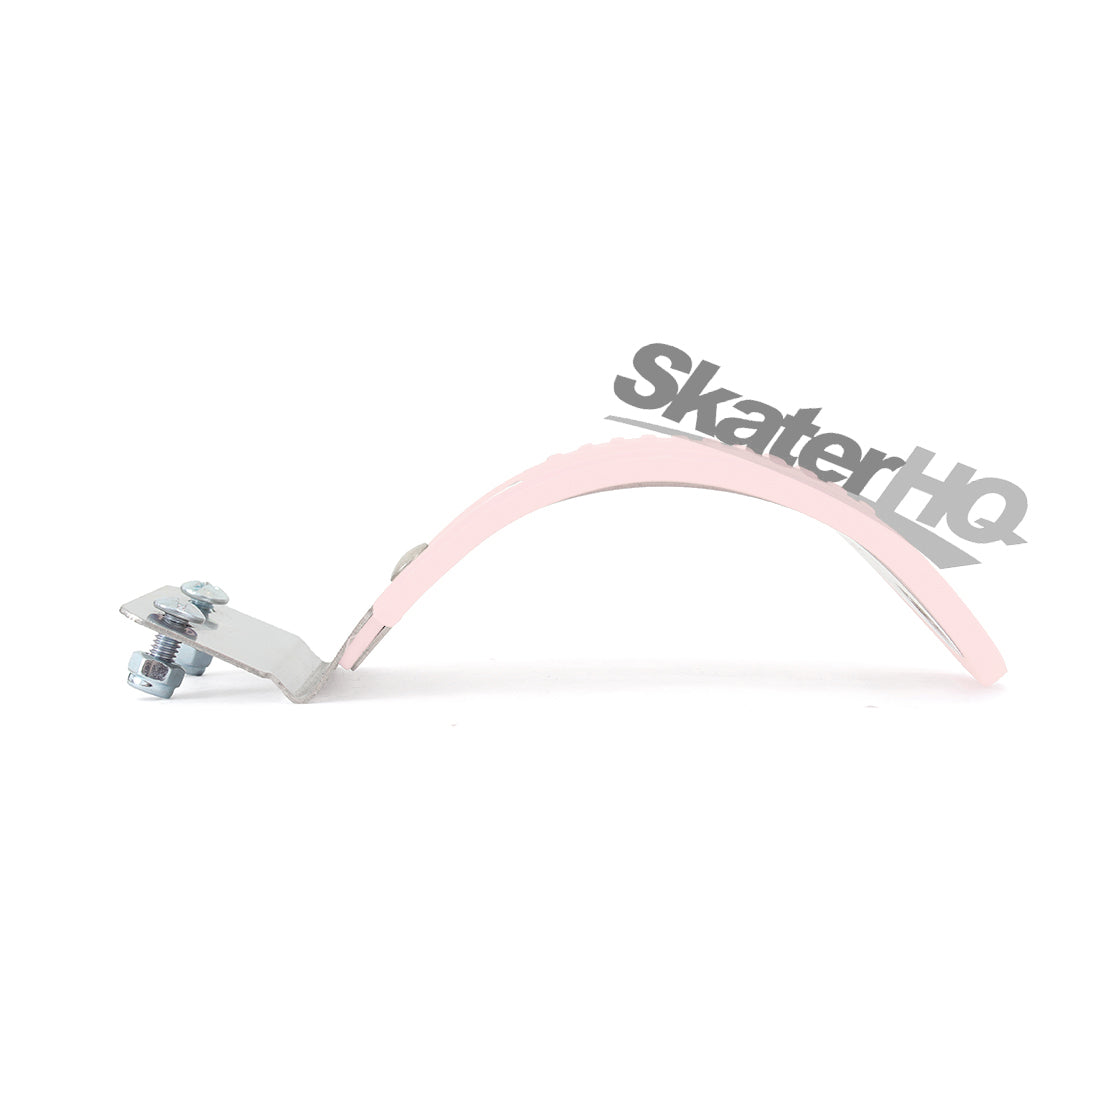 Micro Maxi Deluxe Brake 1737 - Pastel Pink (For Pink) Scooter Hardware and Parts